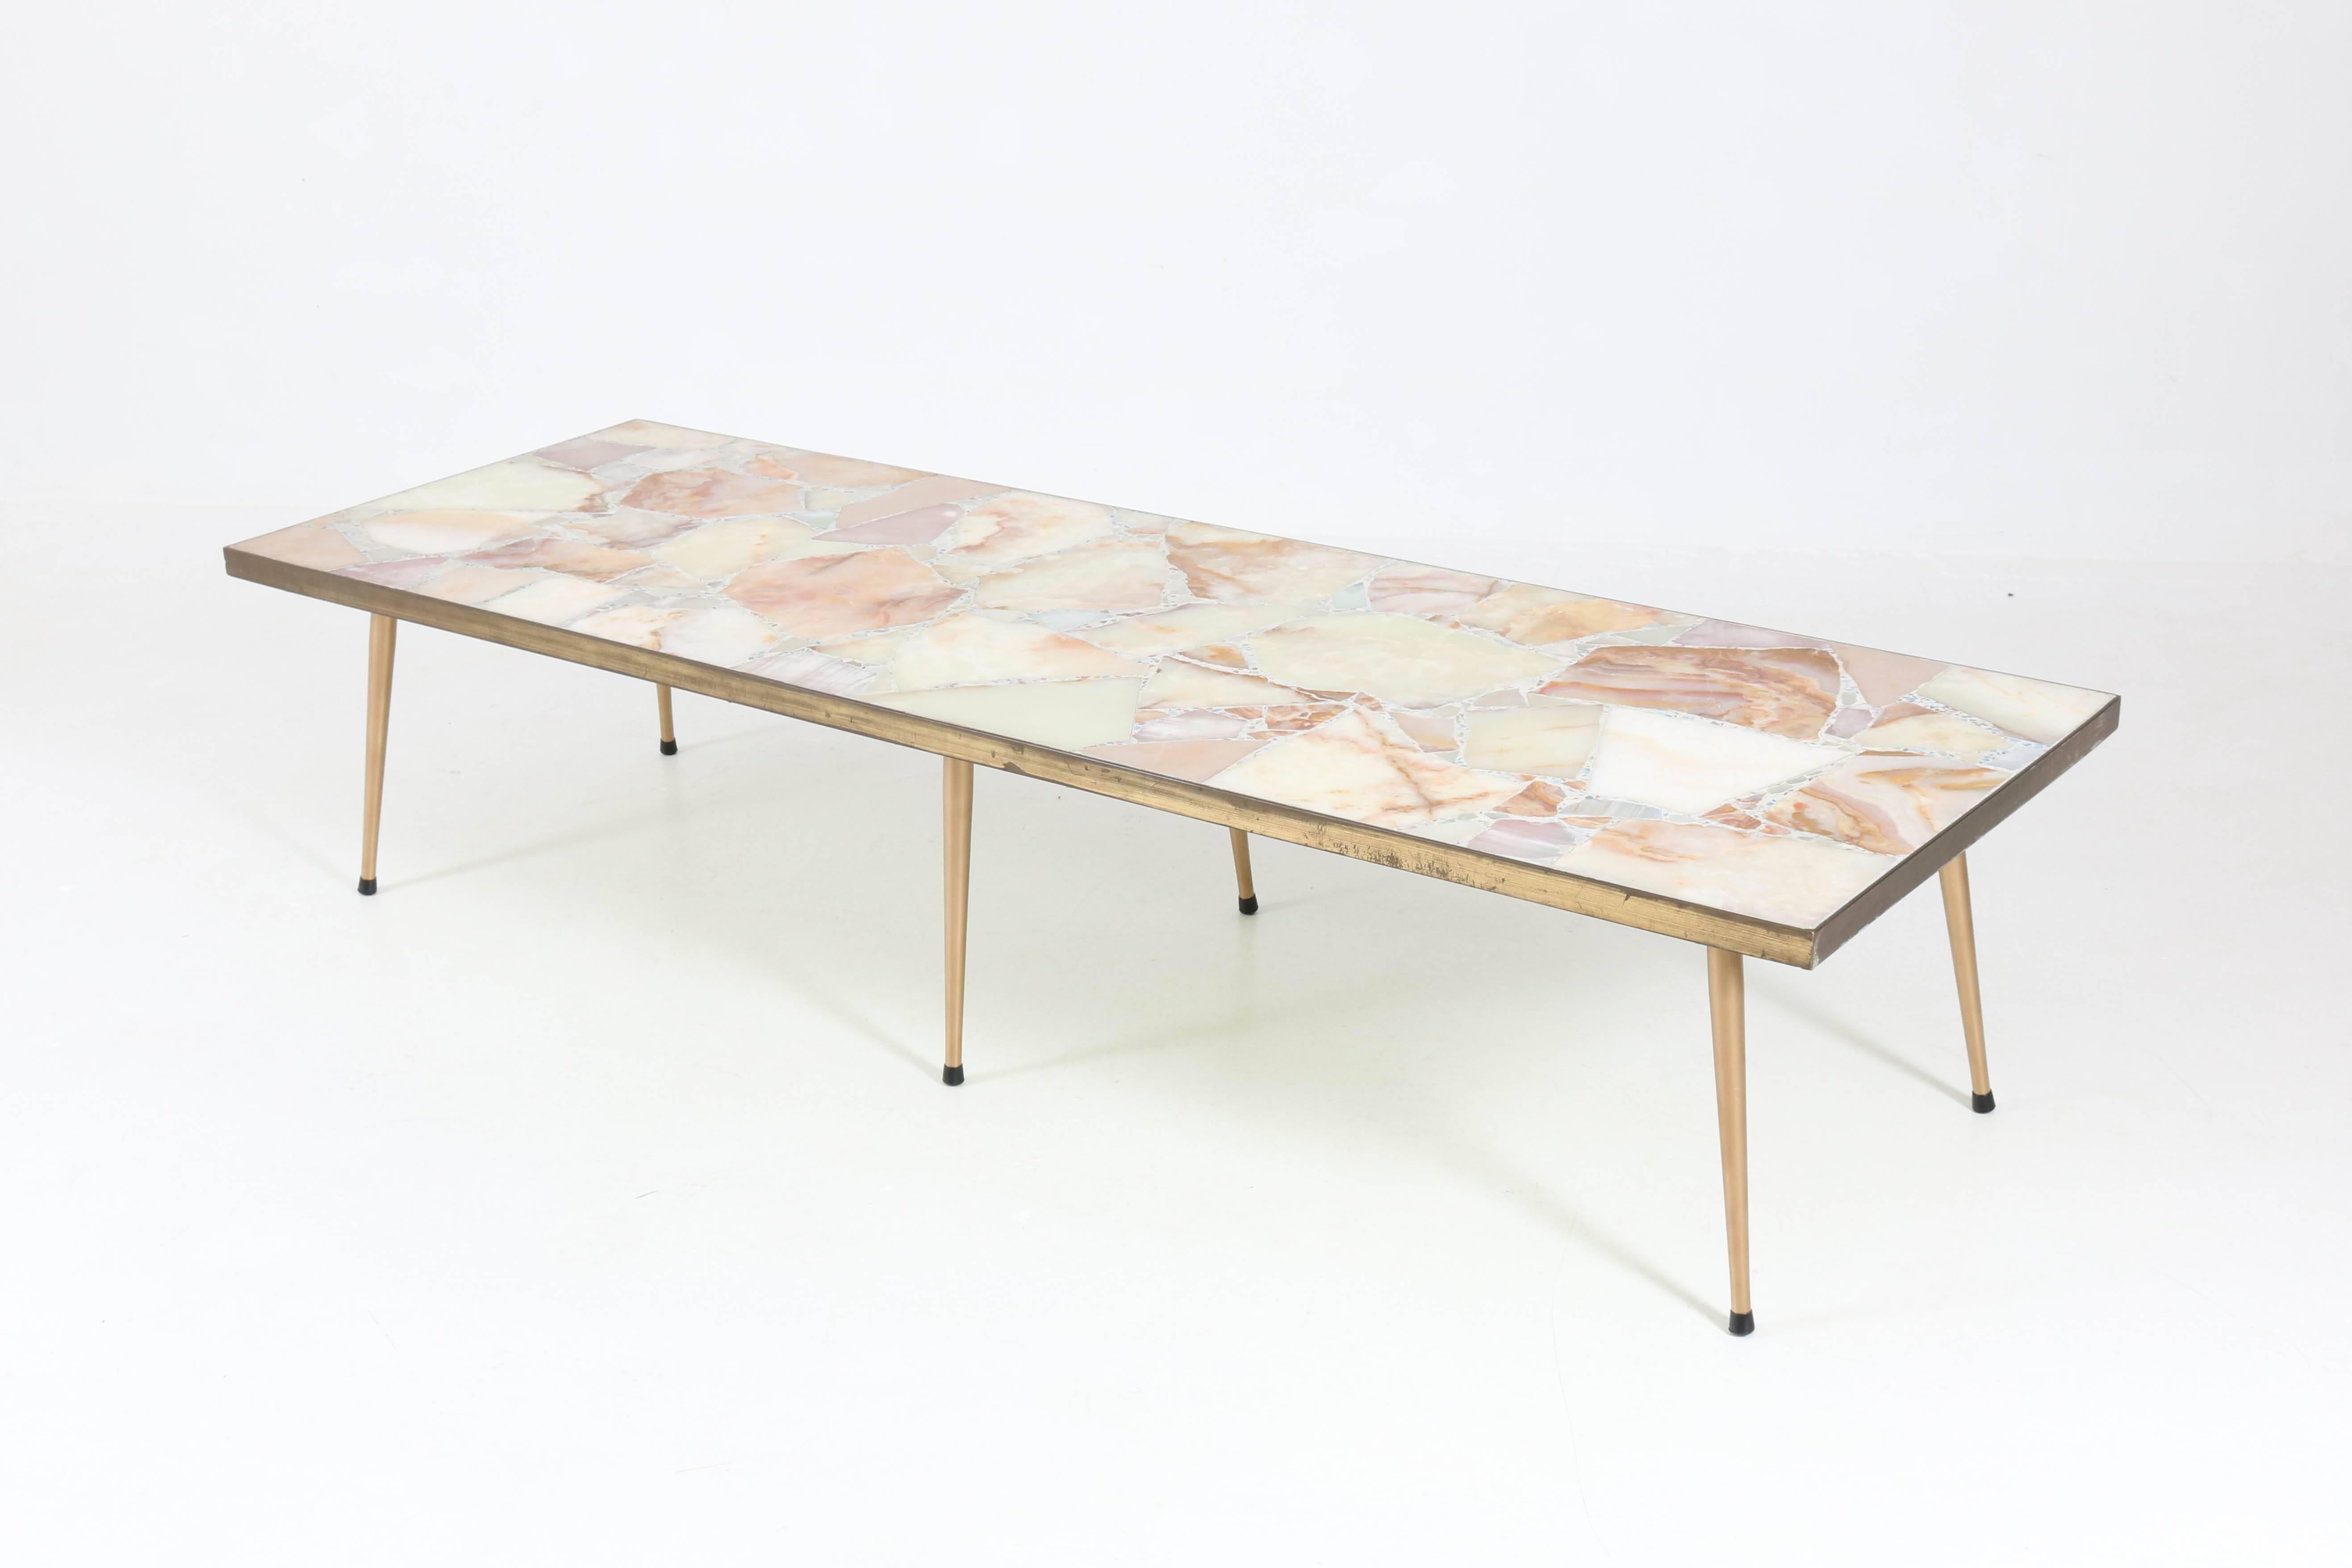 Stunning and rare extra large Mid-Century Modern coffee table.
Elegant Italian design from the 1950s.
Original onyx top in brass and cement.
Six original gilt metal legs.
In good original condition with minor wear consistent with age and